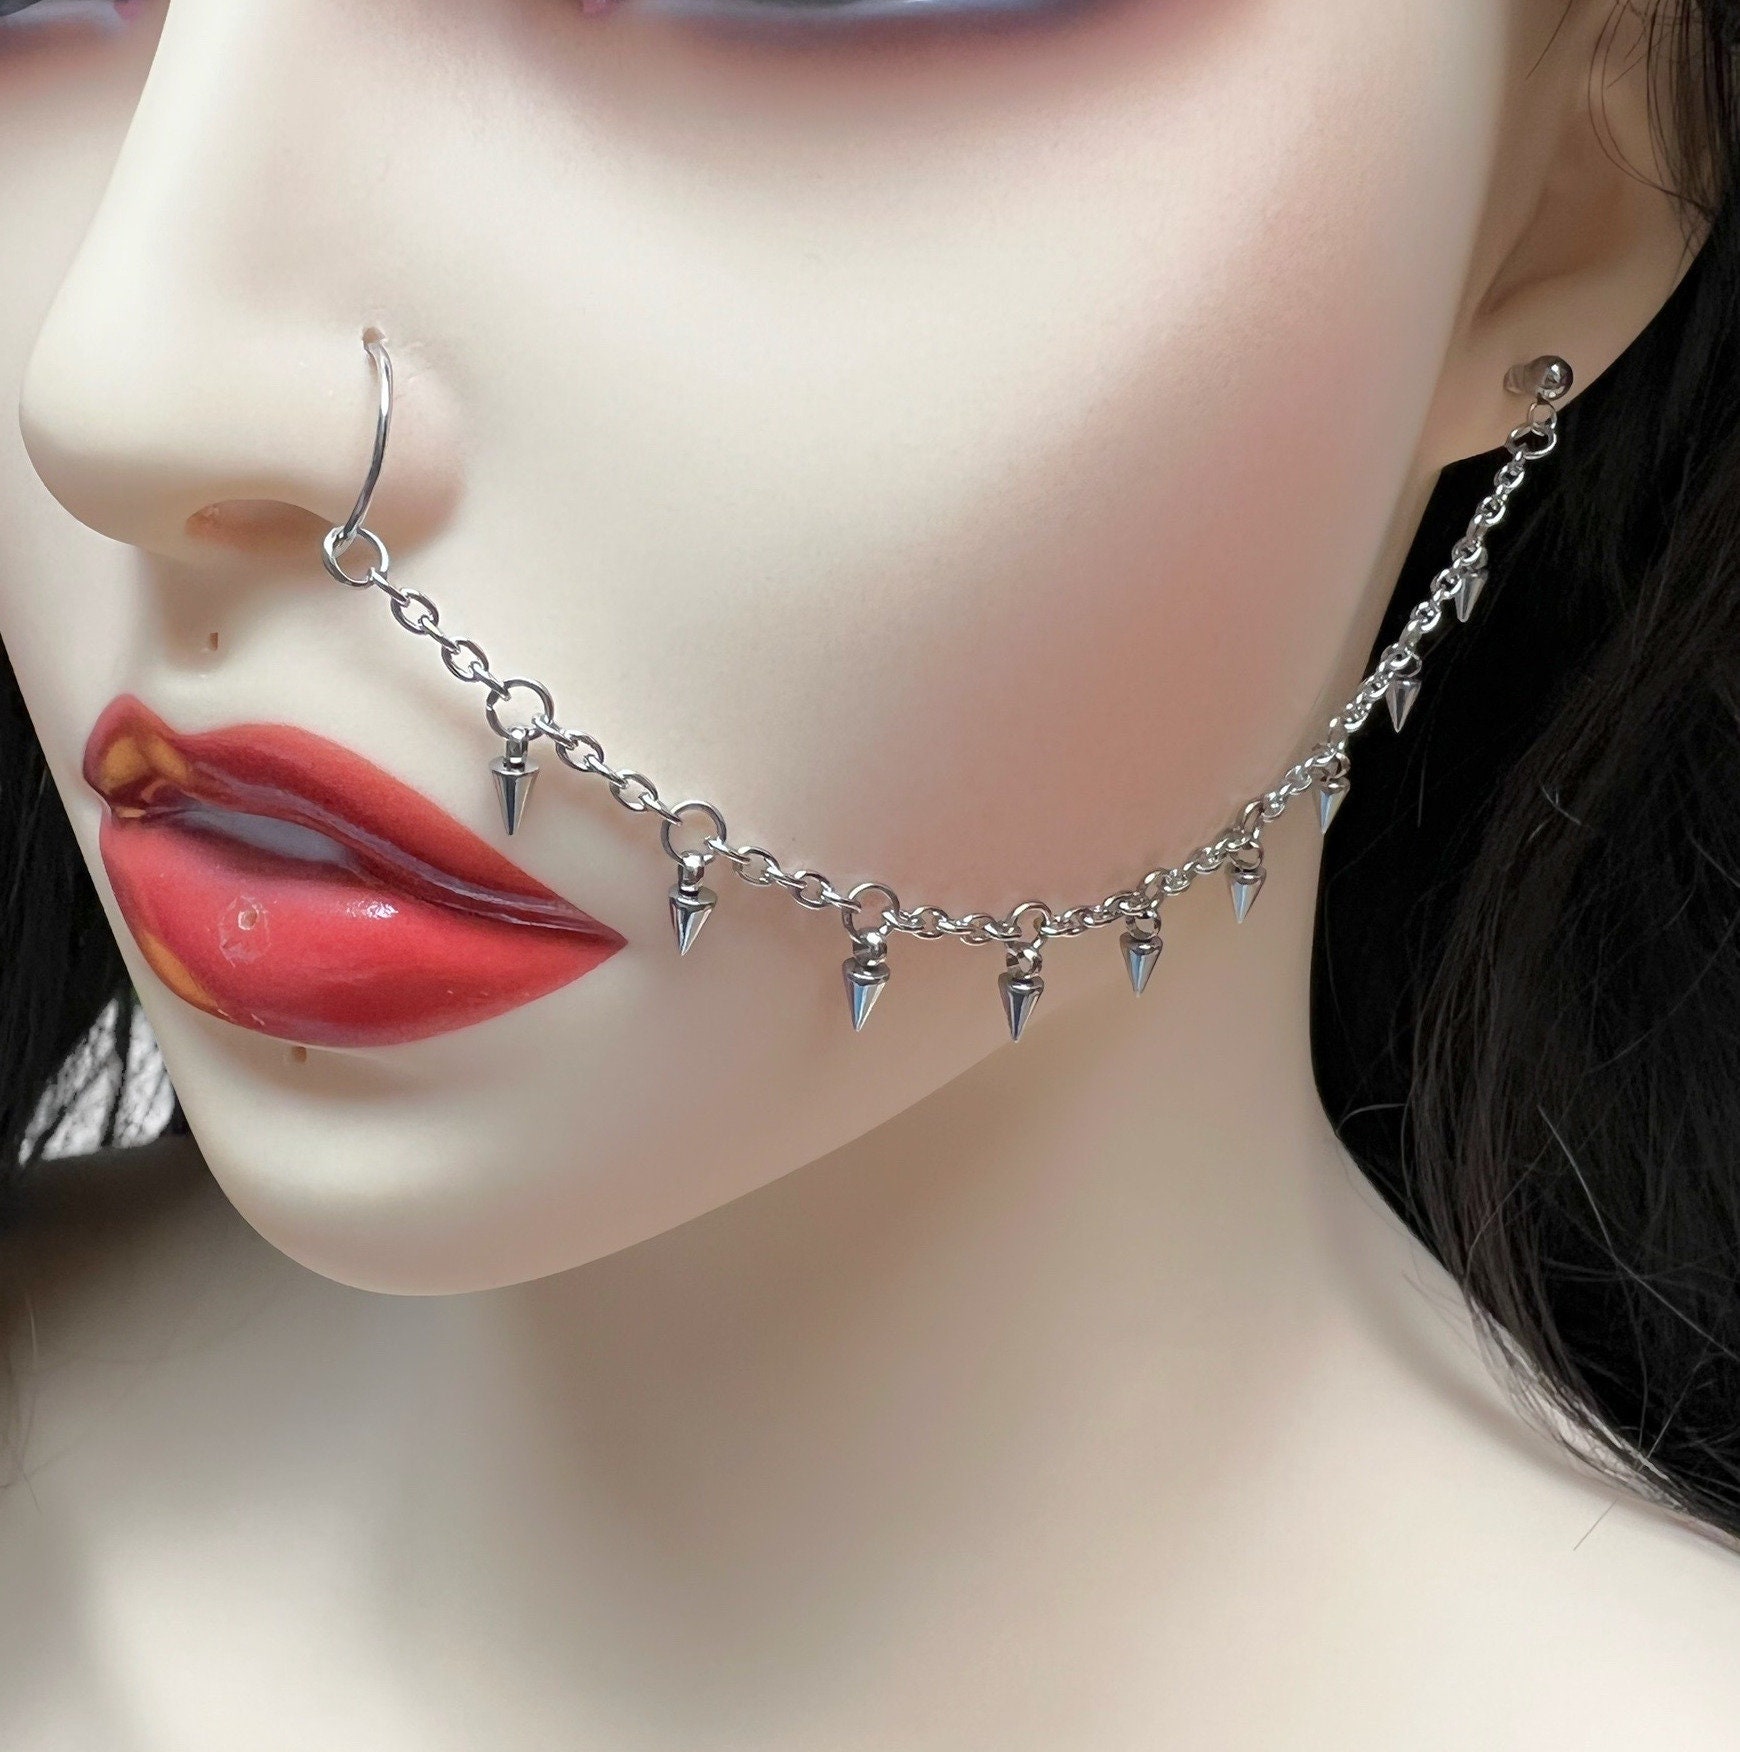 6pcs Nose Chain Nose Chain Ring Stainless Steel Nose Stud Piercing Nose  Jewelry - Walmart.com